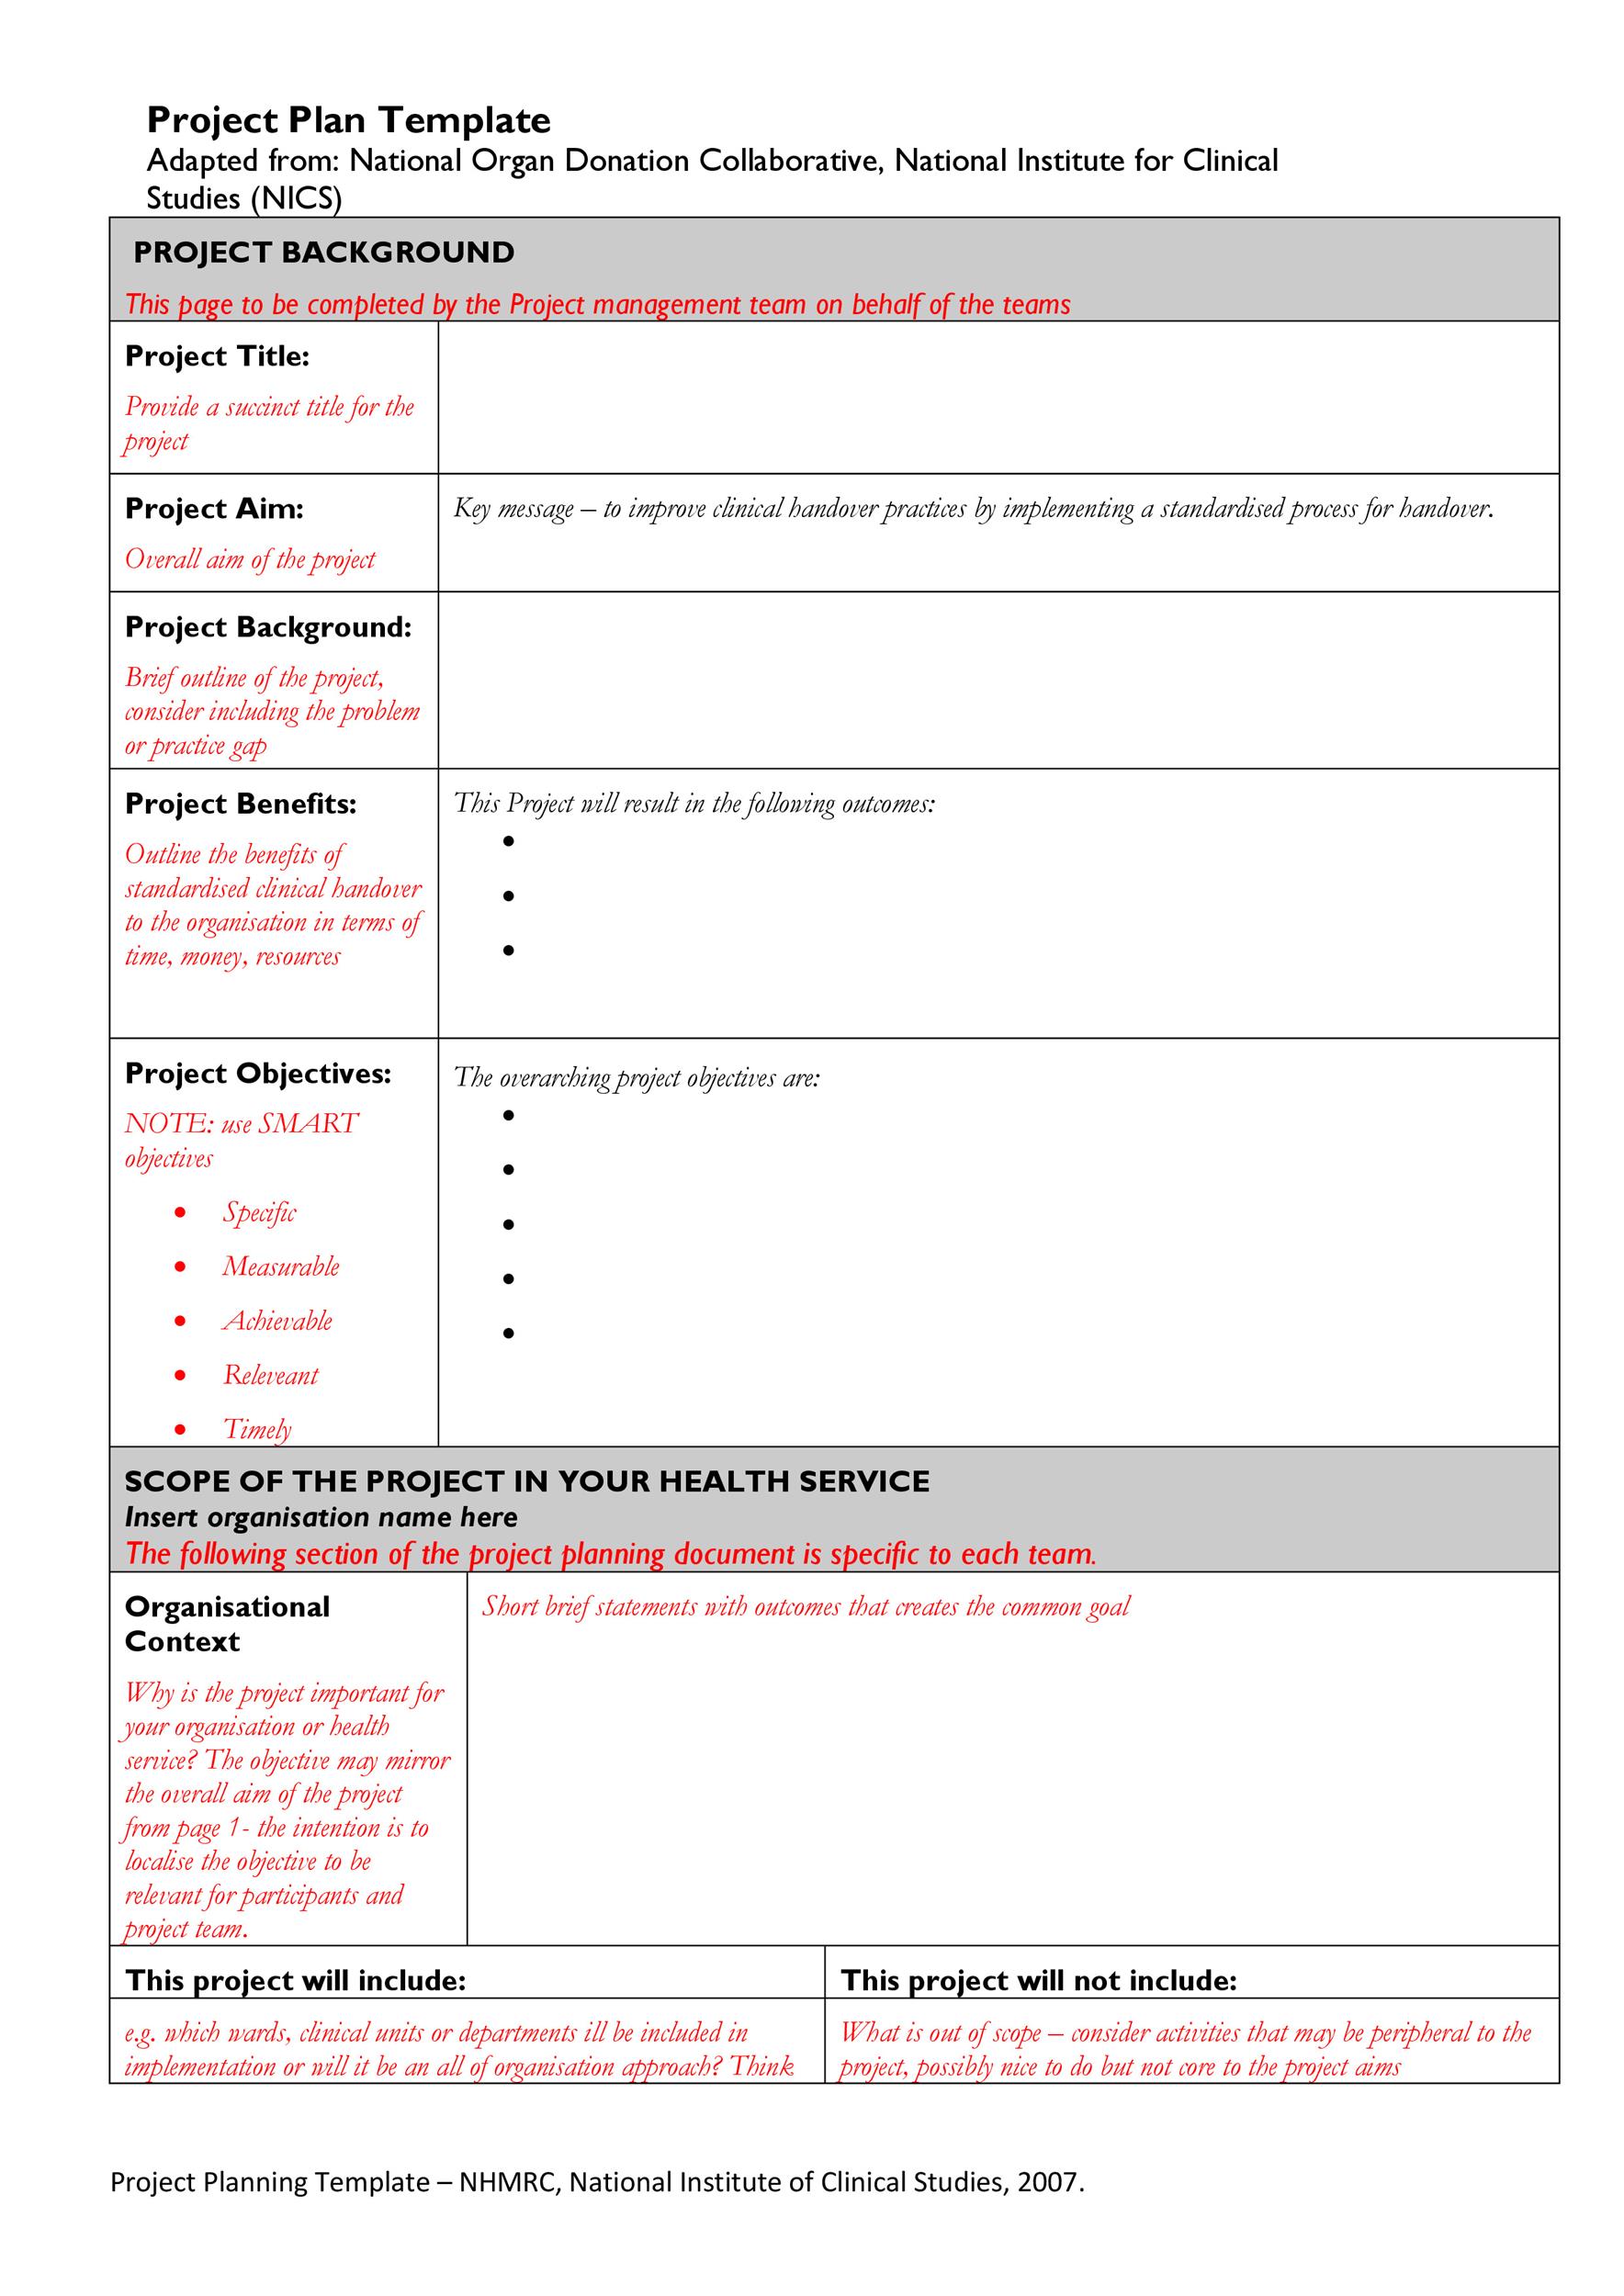 48 Professional Project Plan Templates Excel Word PDF ᐅ TemplateLab